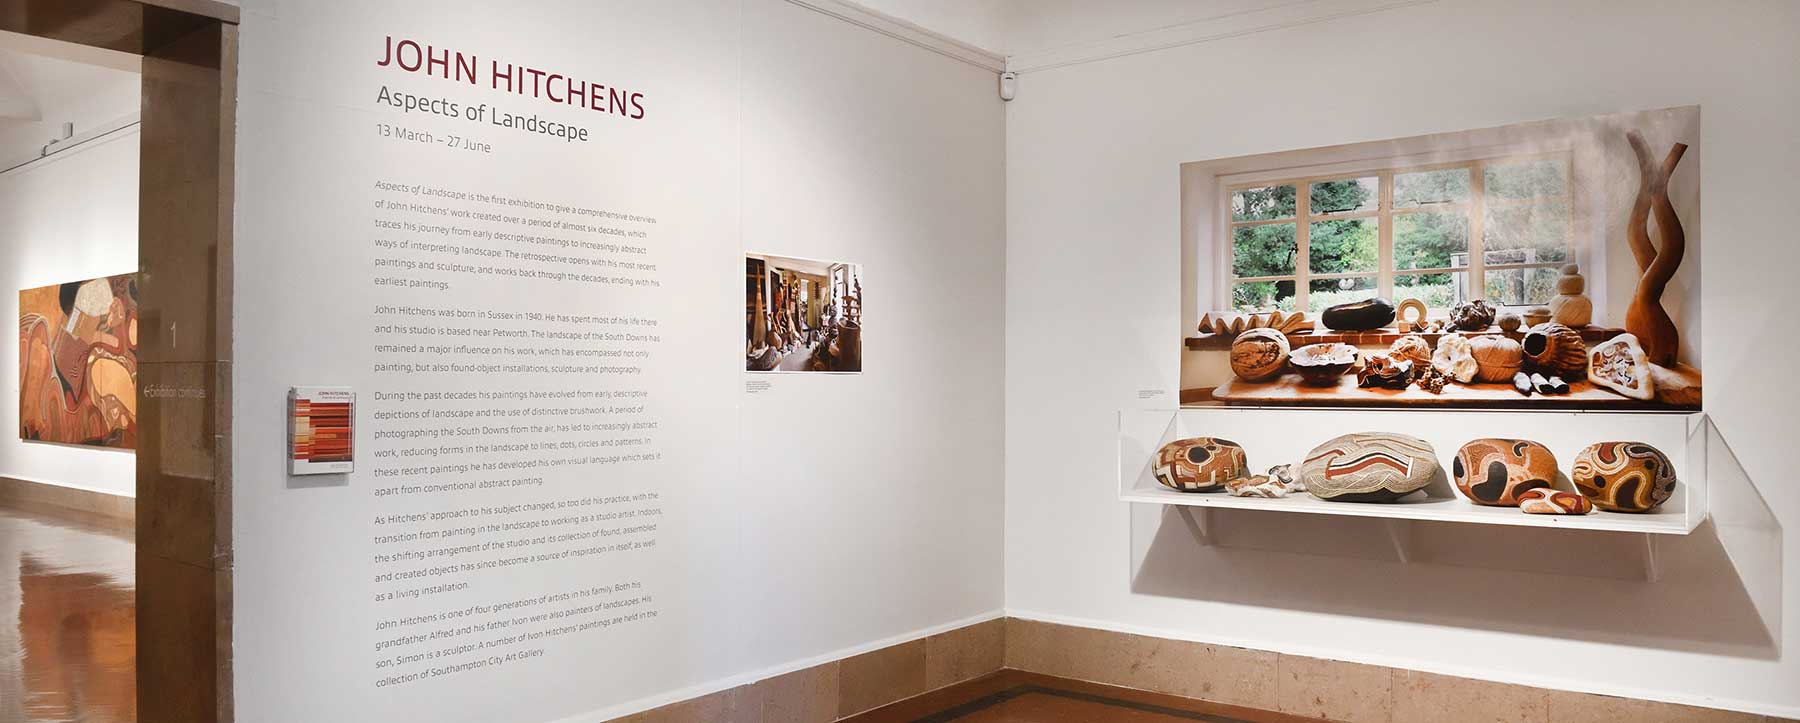 John Hitchens exhibition, Aspects of Landscape at Southampton City Gallery